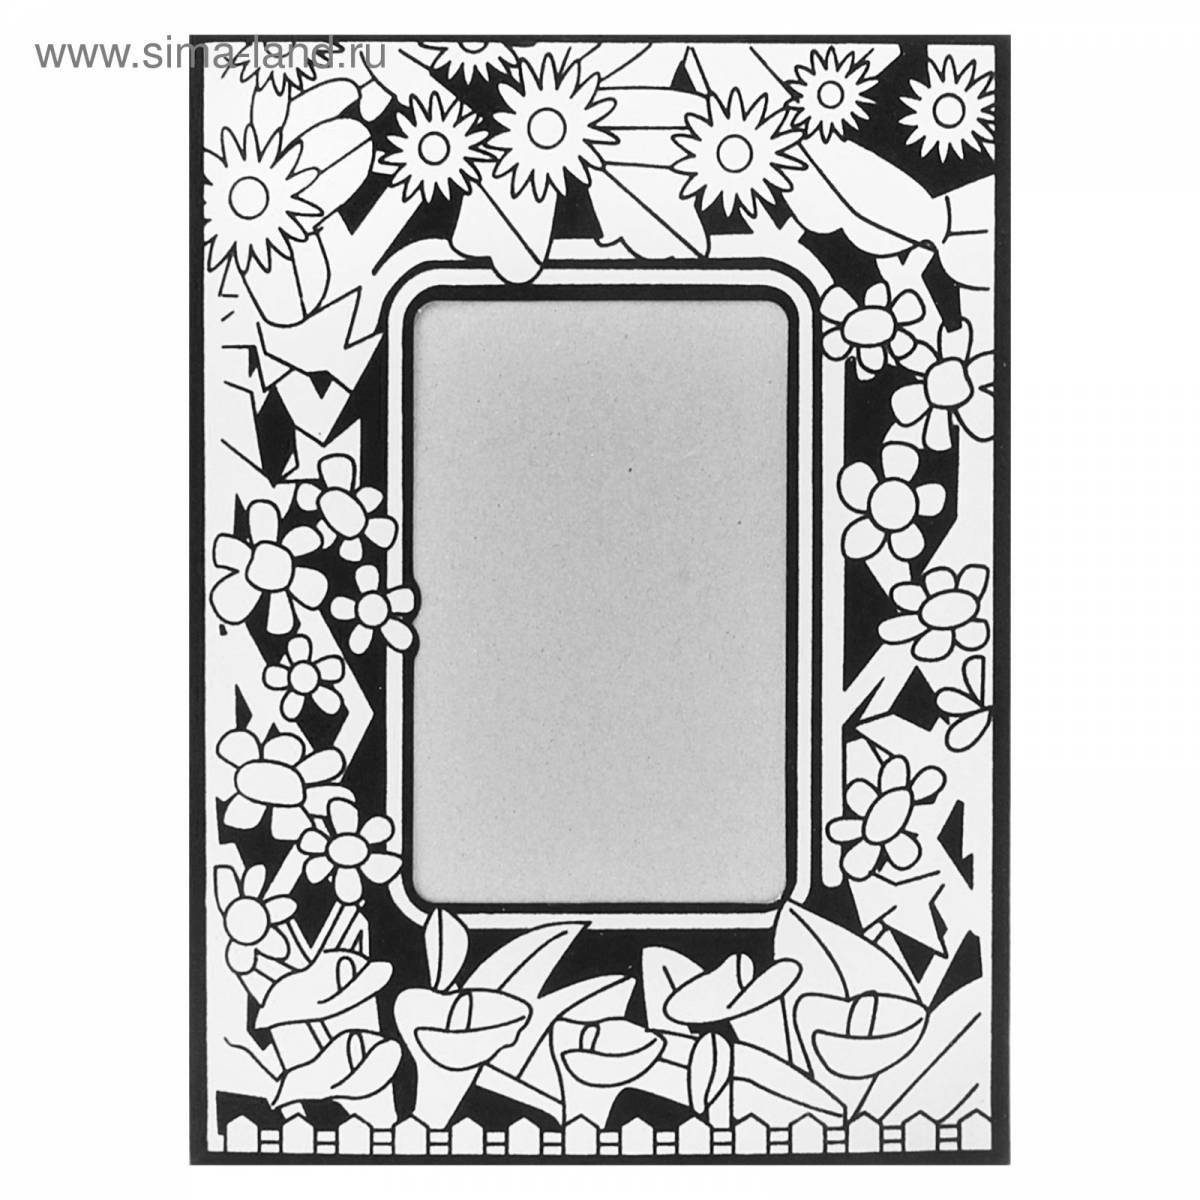 Fun photo frame coloring page